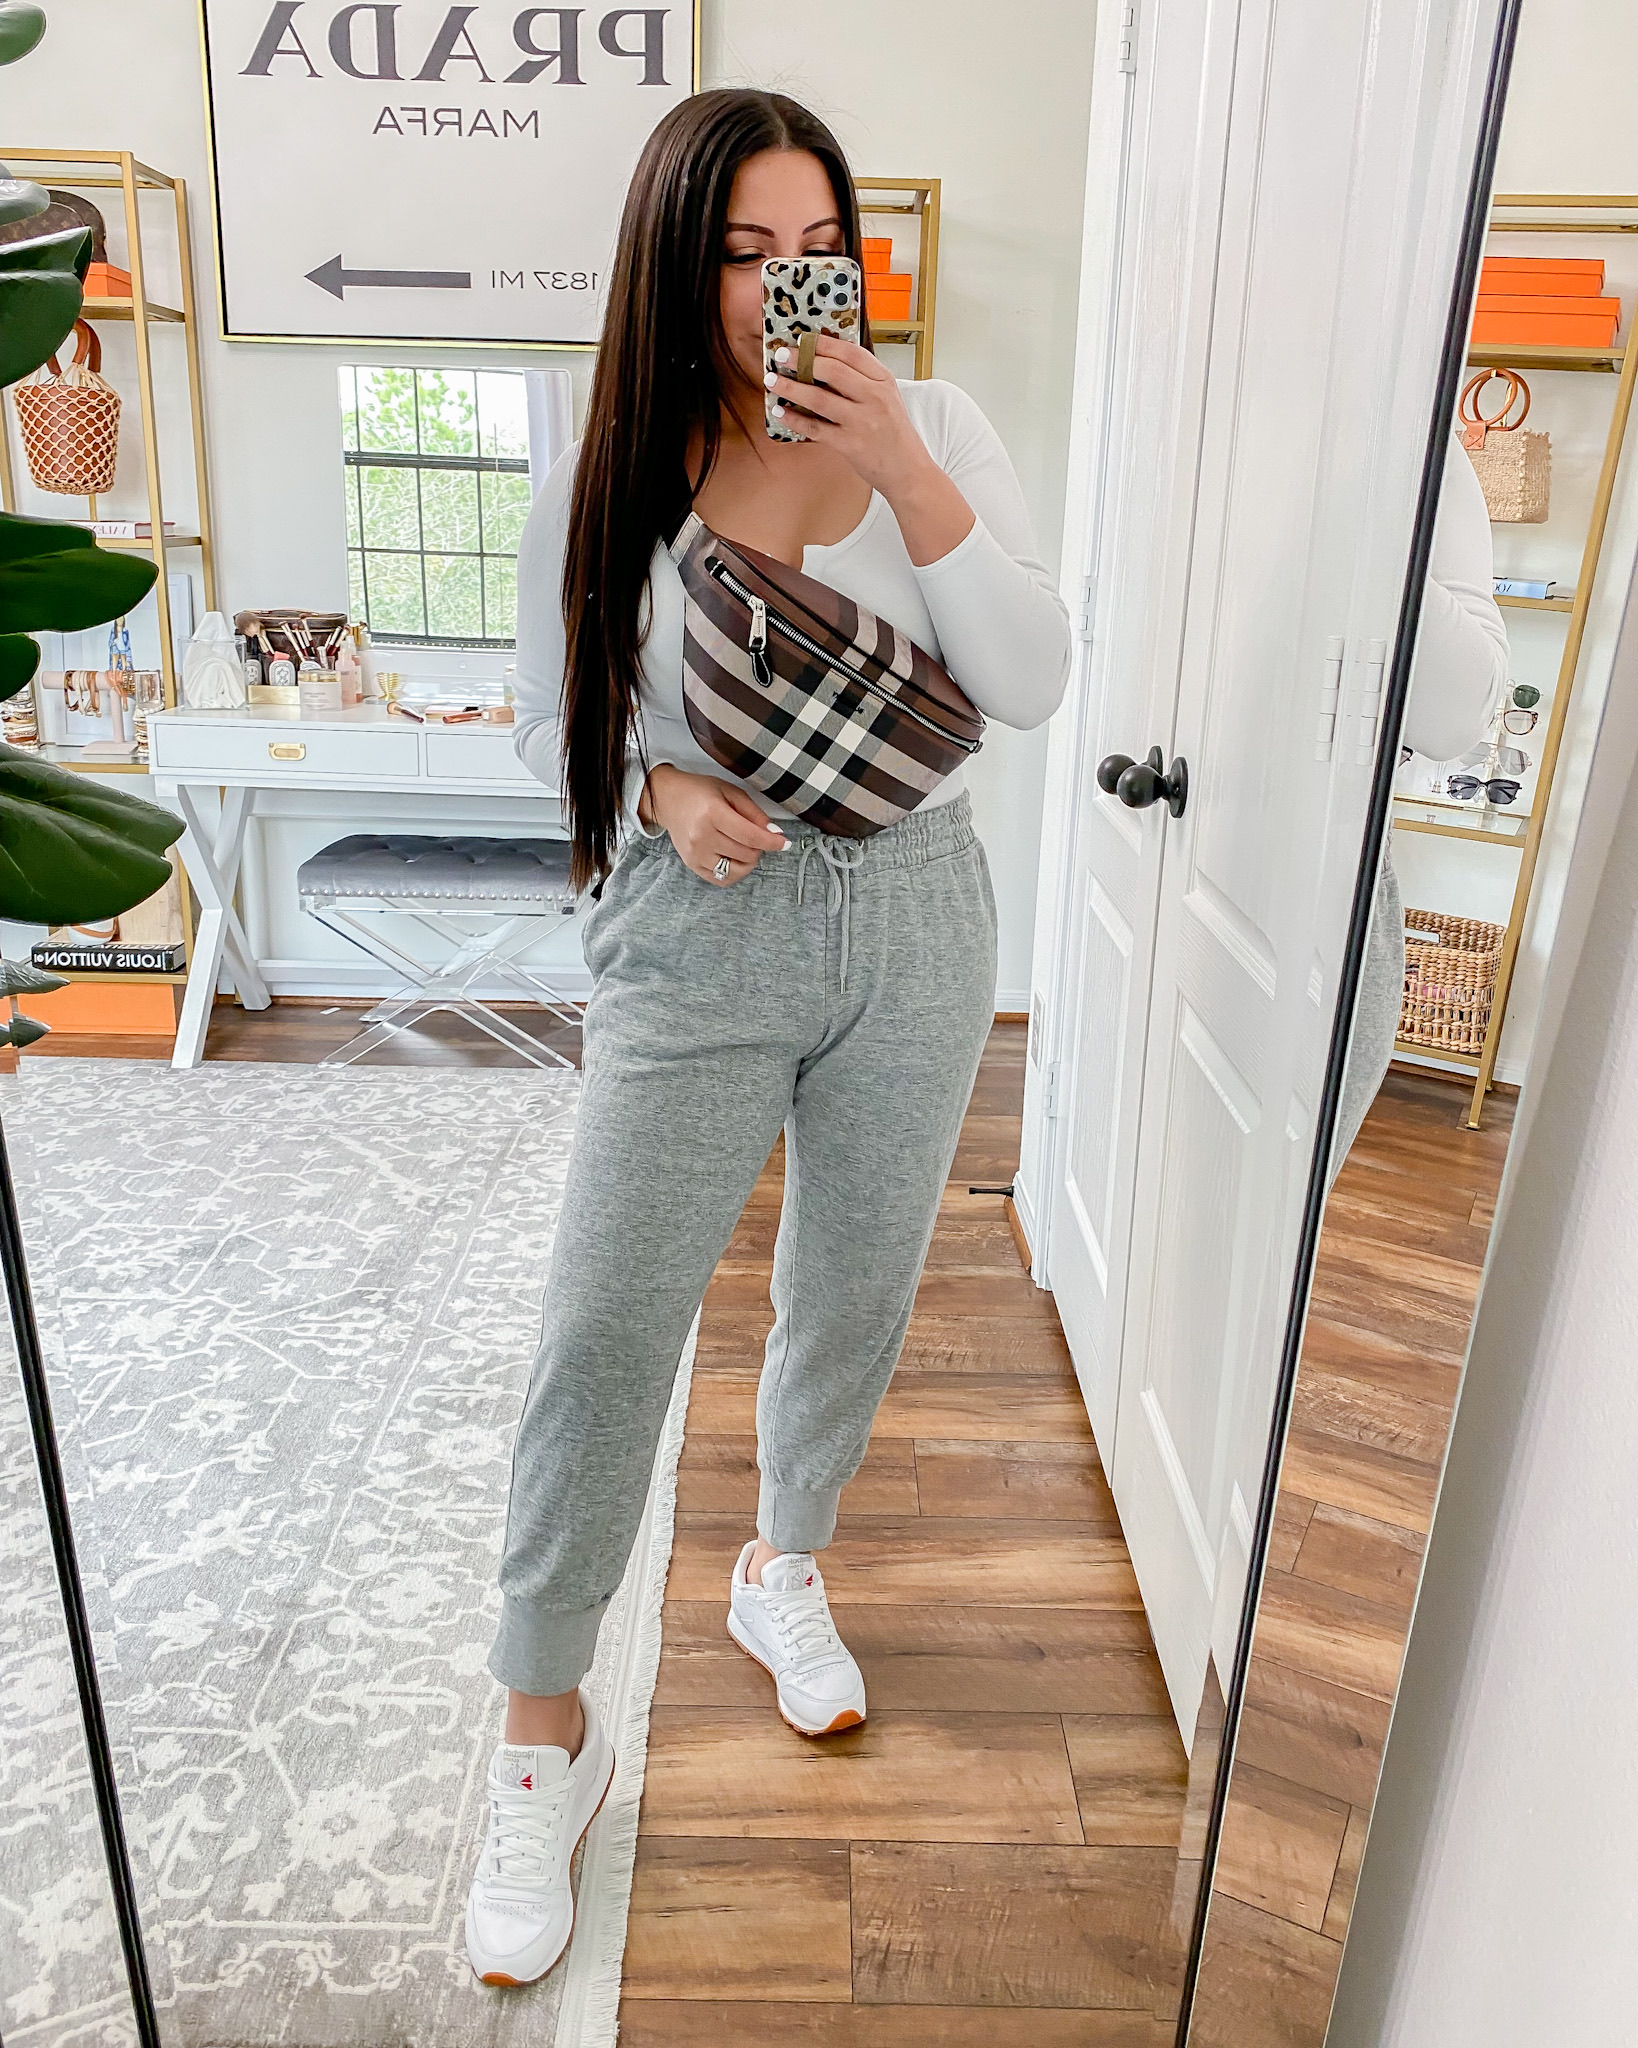 Houston fashion/lifestyle blogger LuxMommy styling a casual outfit.